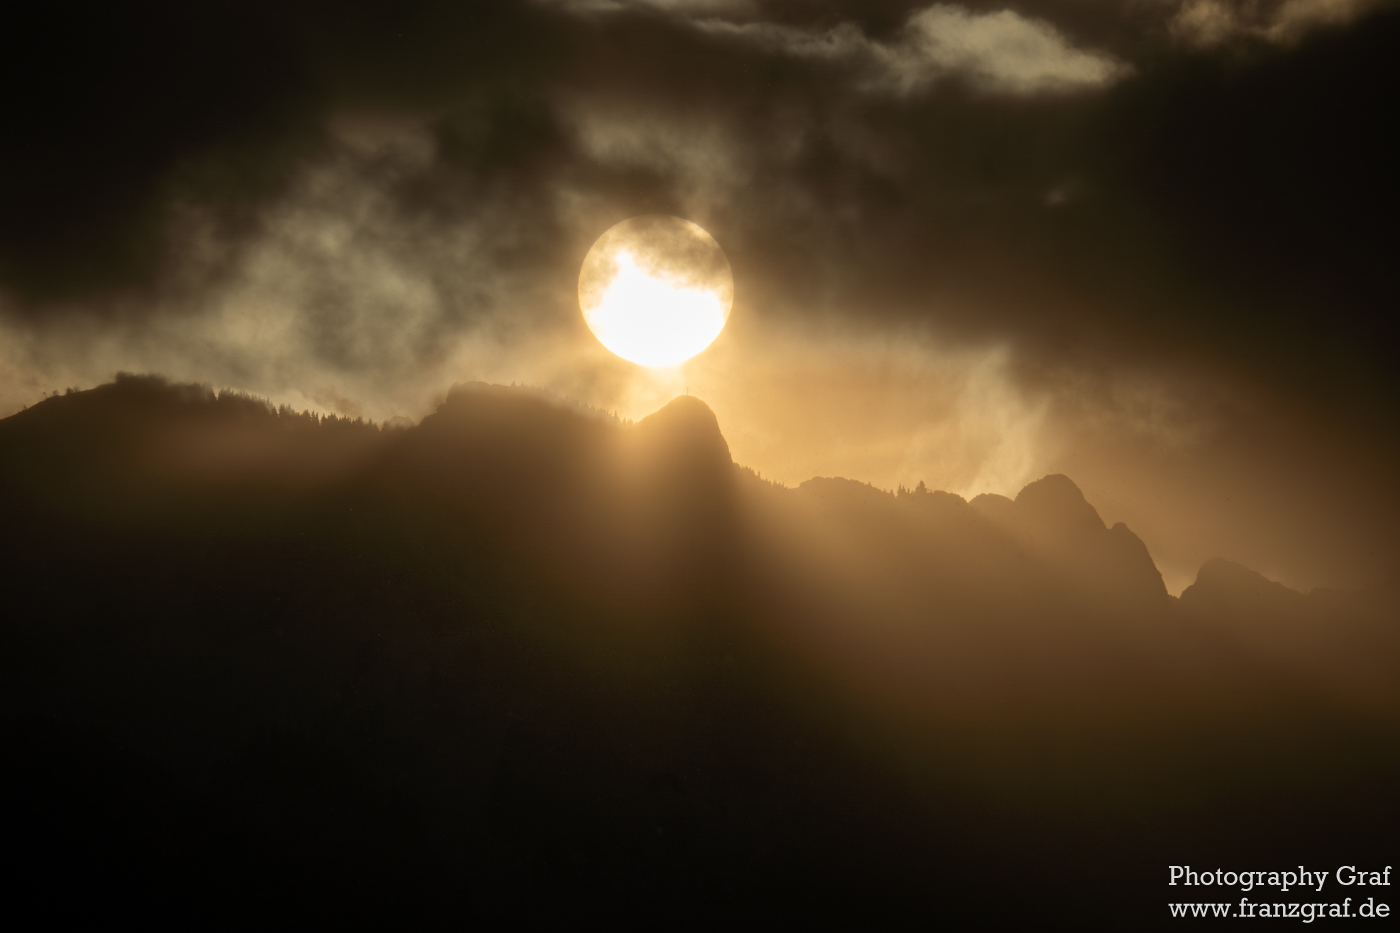 The image unfolds a dramatic natural tableau, where the sun's descent (or ascent) casts a radiant glow behind a mountain range. Dark clouds traverse the sky, yet the sun's brilliance pierces through, spotlighting the rugged peaks. This interplay of light and shadow, accentuated by the rays" creates a dynamic and almost three-dimensional effect. The mountains, silhouetted against the bright backdrop, stand as timeless witnesses to the spectacle. The scene is a powerful display of nature's contrasts, evoking awe and a sense of tranquility in its viewers. It's a visual poem, where each element contributes to the overall ethereal atmosphere, reminding us of the enduring beauty of the natural world. The watermark indicates the artist's skill in freezing this moment of awe-inspiring interplay between light and darkness.